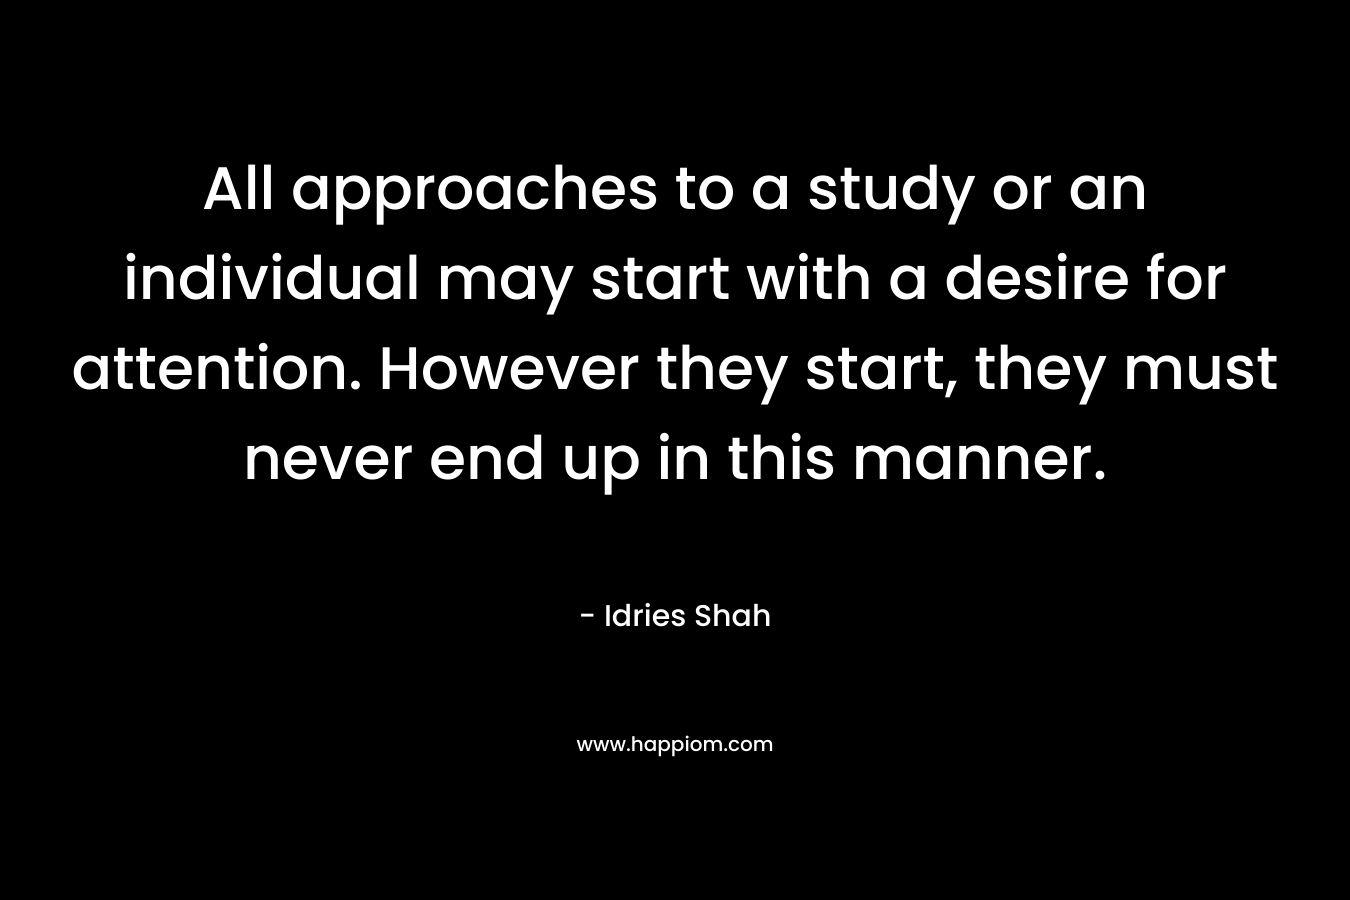 All approaches to a study or an individual may start with a desire for attention. However they start, they must never end up in this manner.